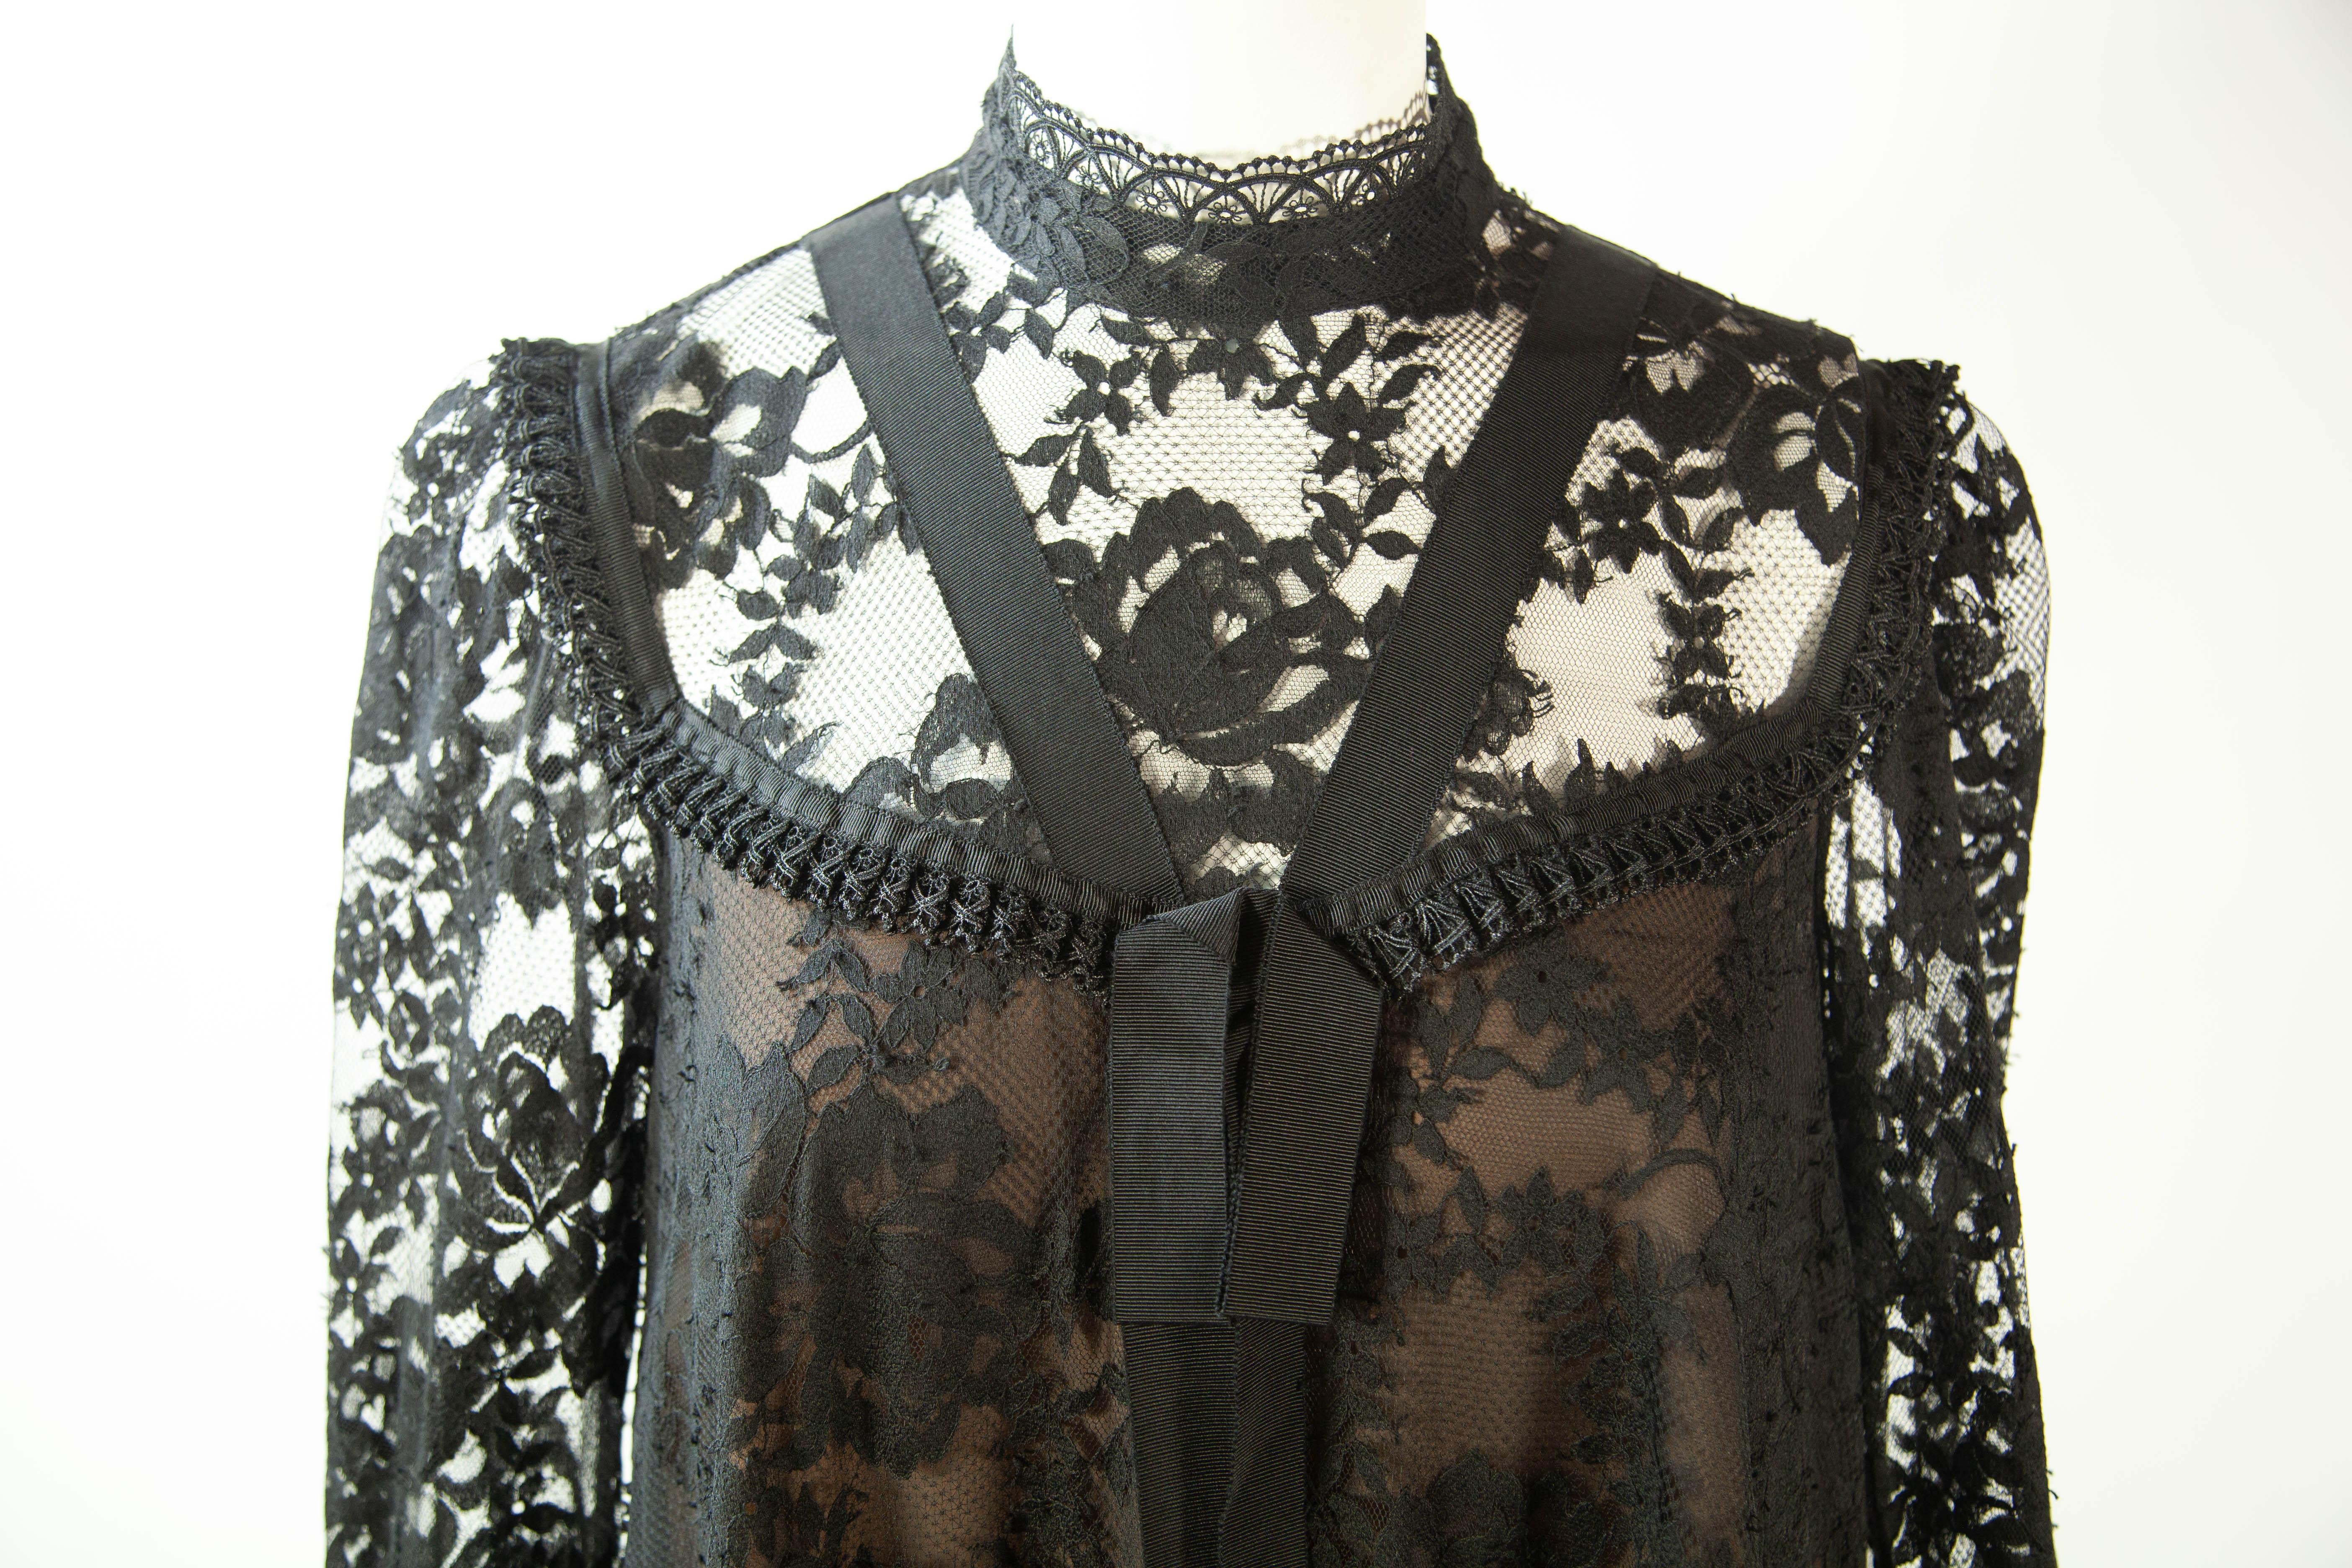 Erdem X H&M black, lace dress with pleated cuffs and hem. Worn by celebrity (please inquire).

34